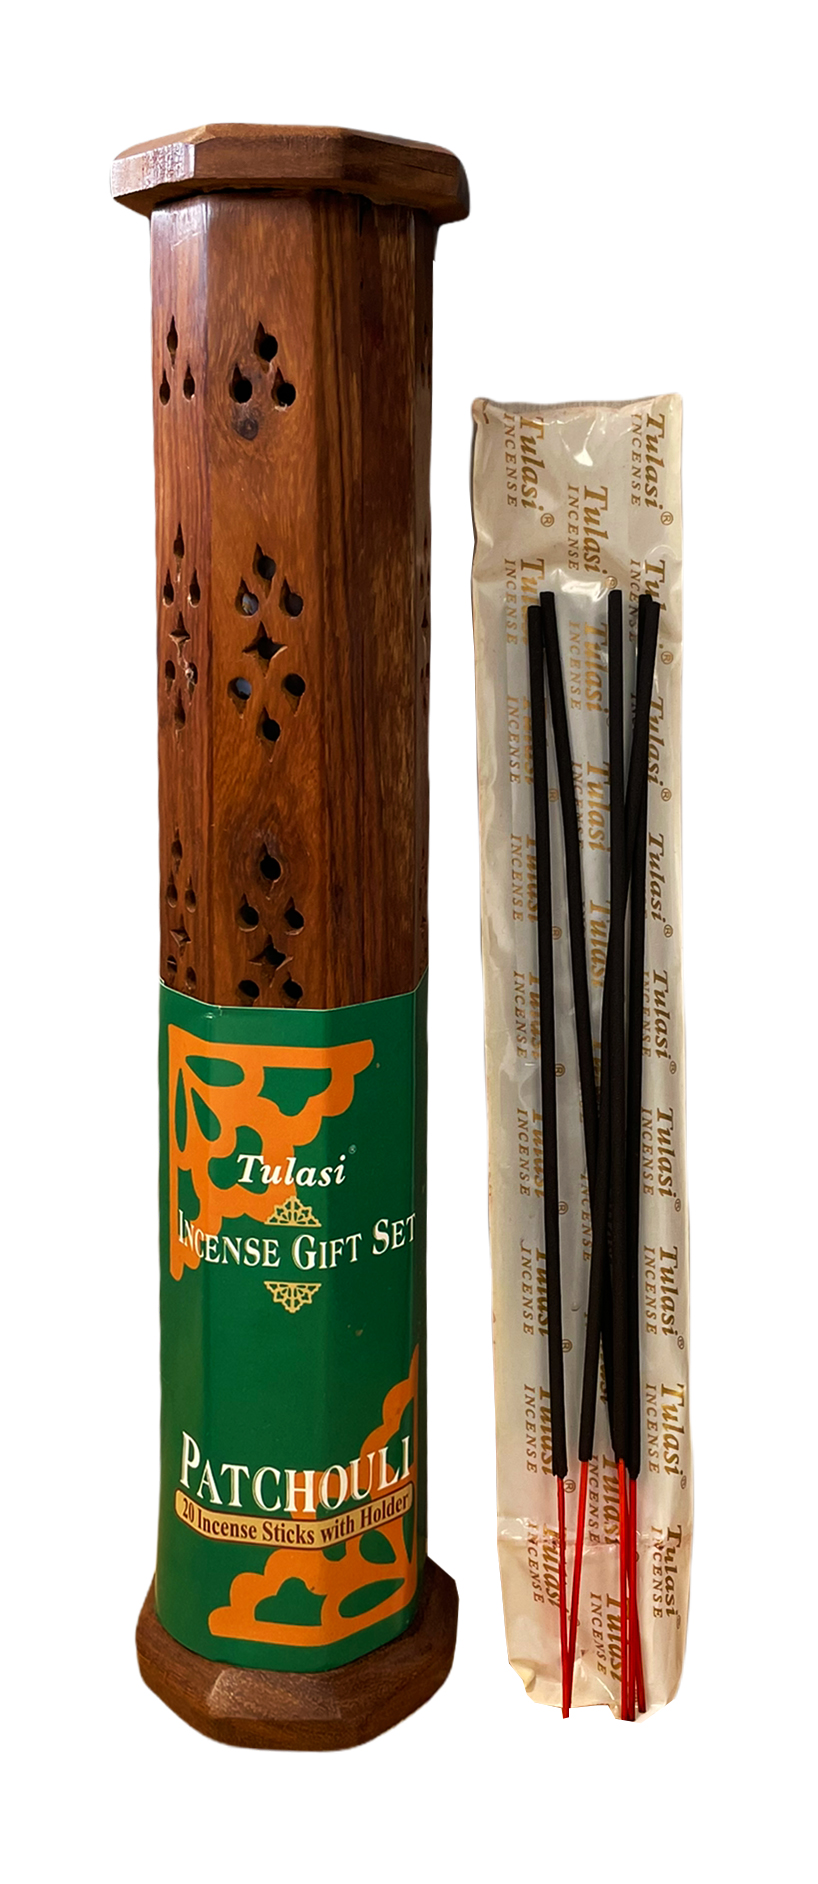 Elephant wooden tower incense holder 30cm with 20 incense sticks Tulasi Patchouli